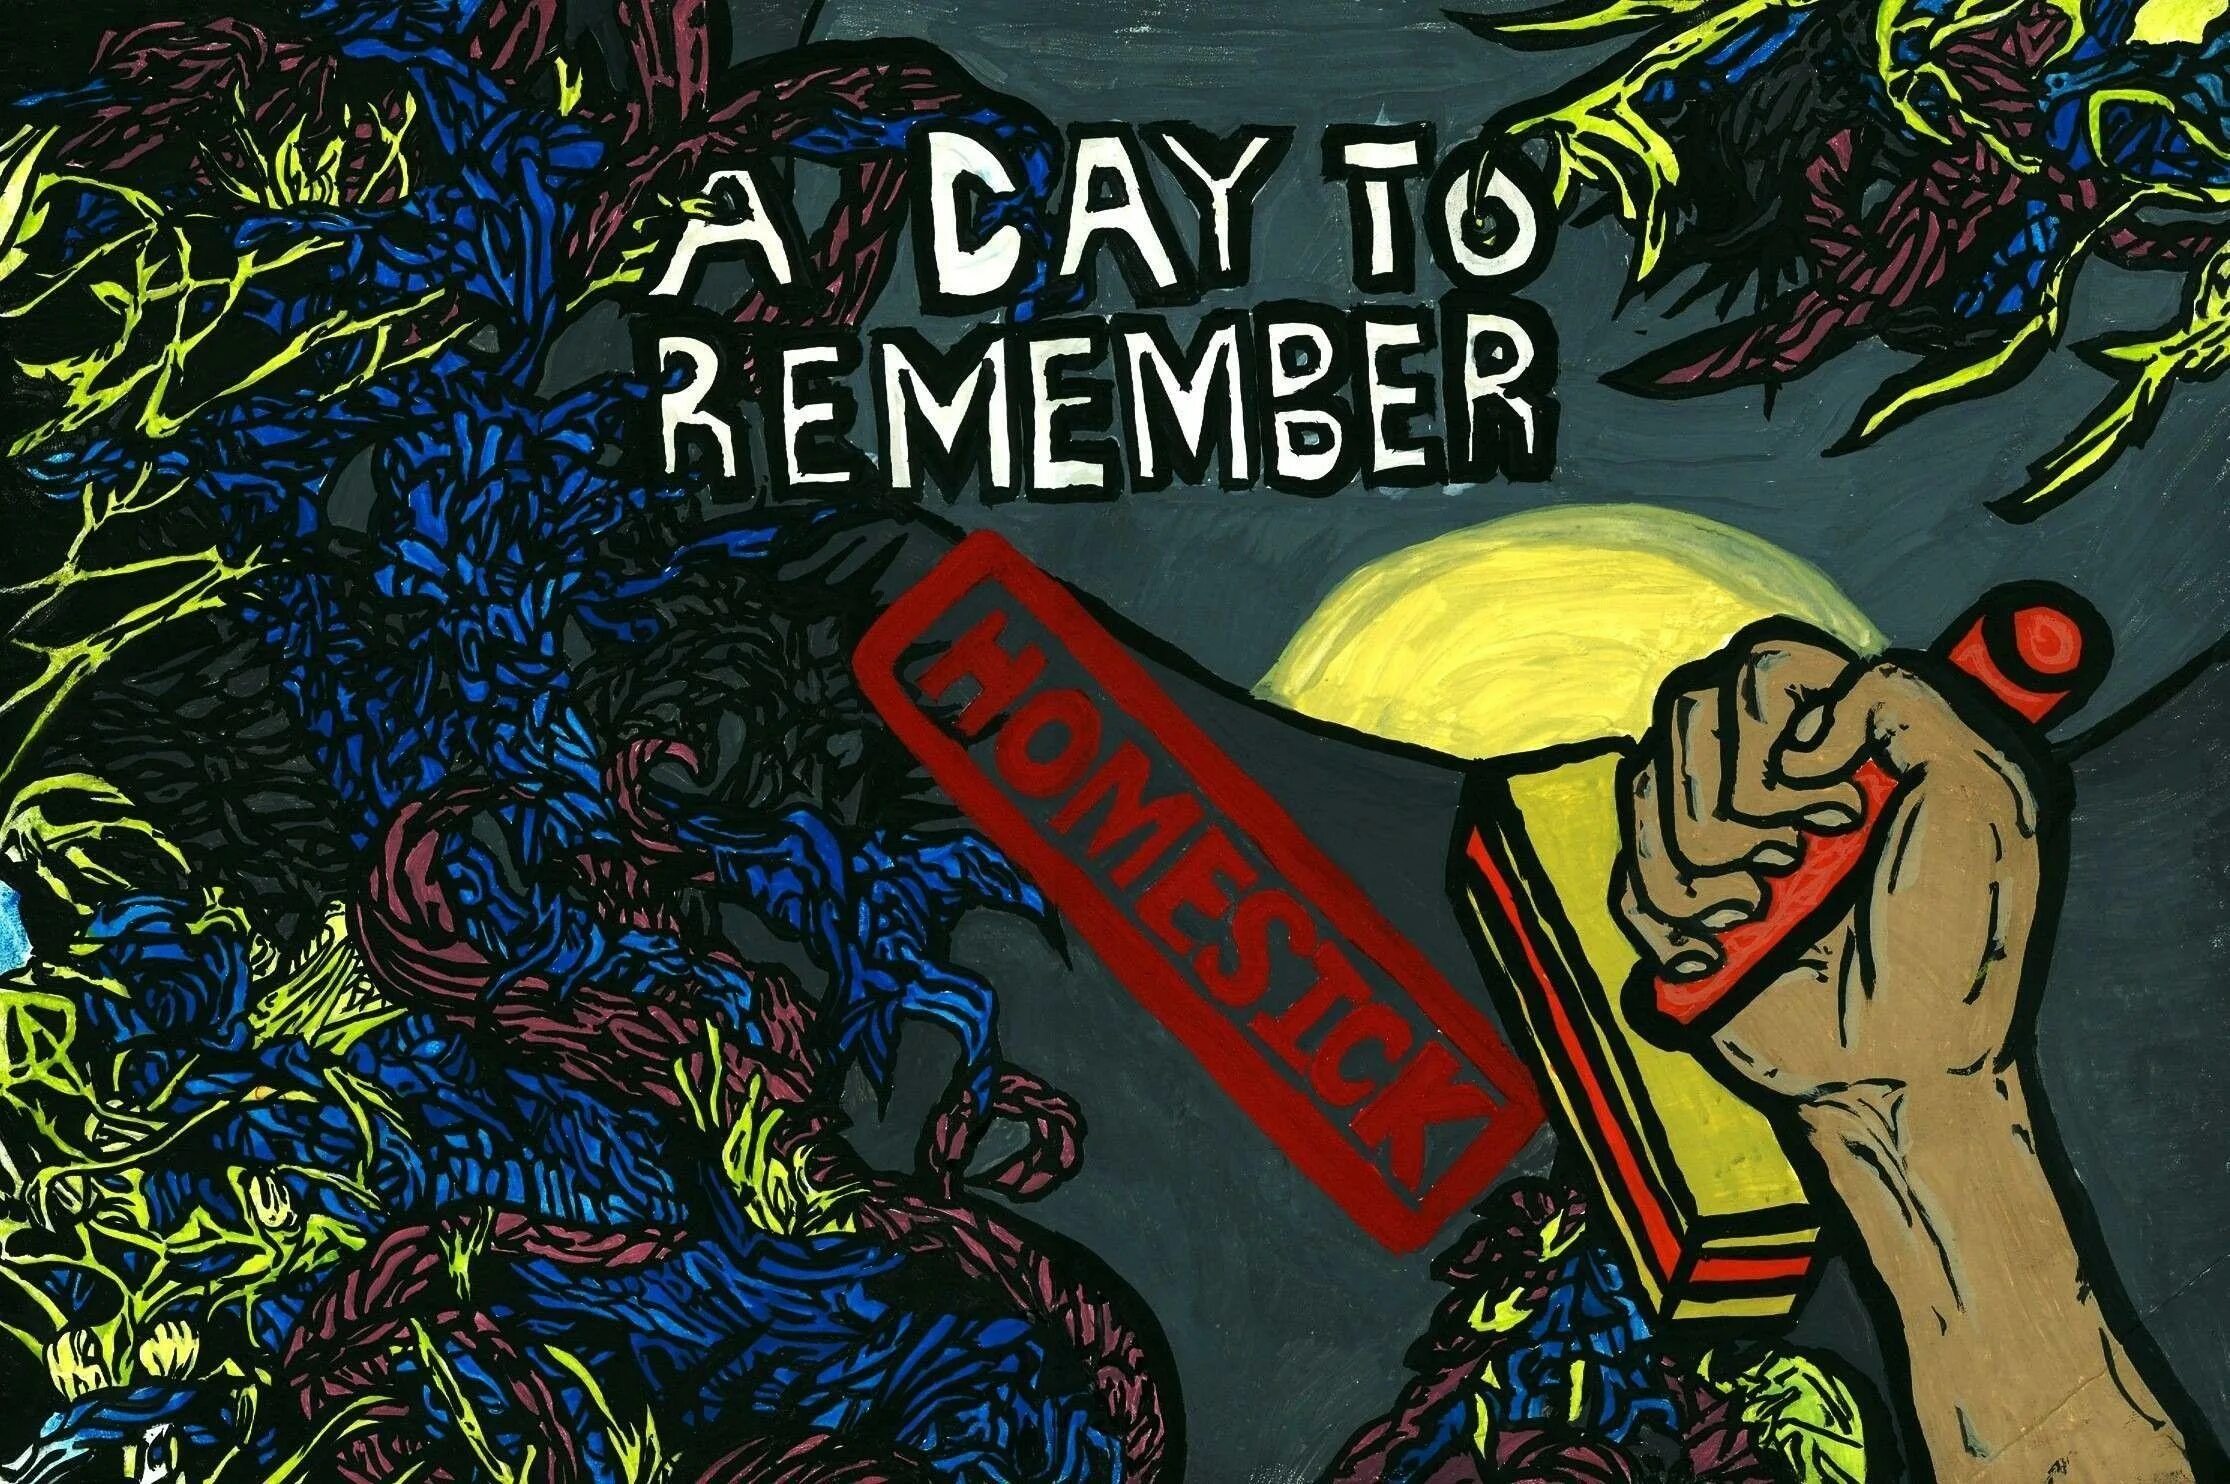 A Day to remember. A Day to remember логотип. Группа a Day to remember. A Day to remember обложка обои. Holiday to remember